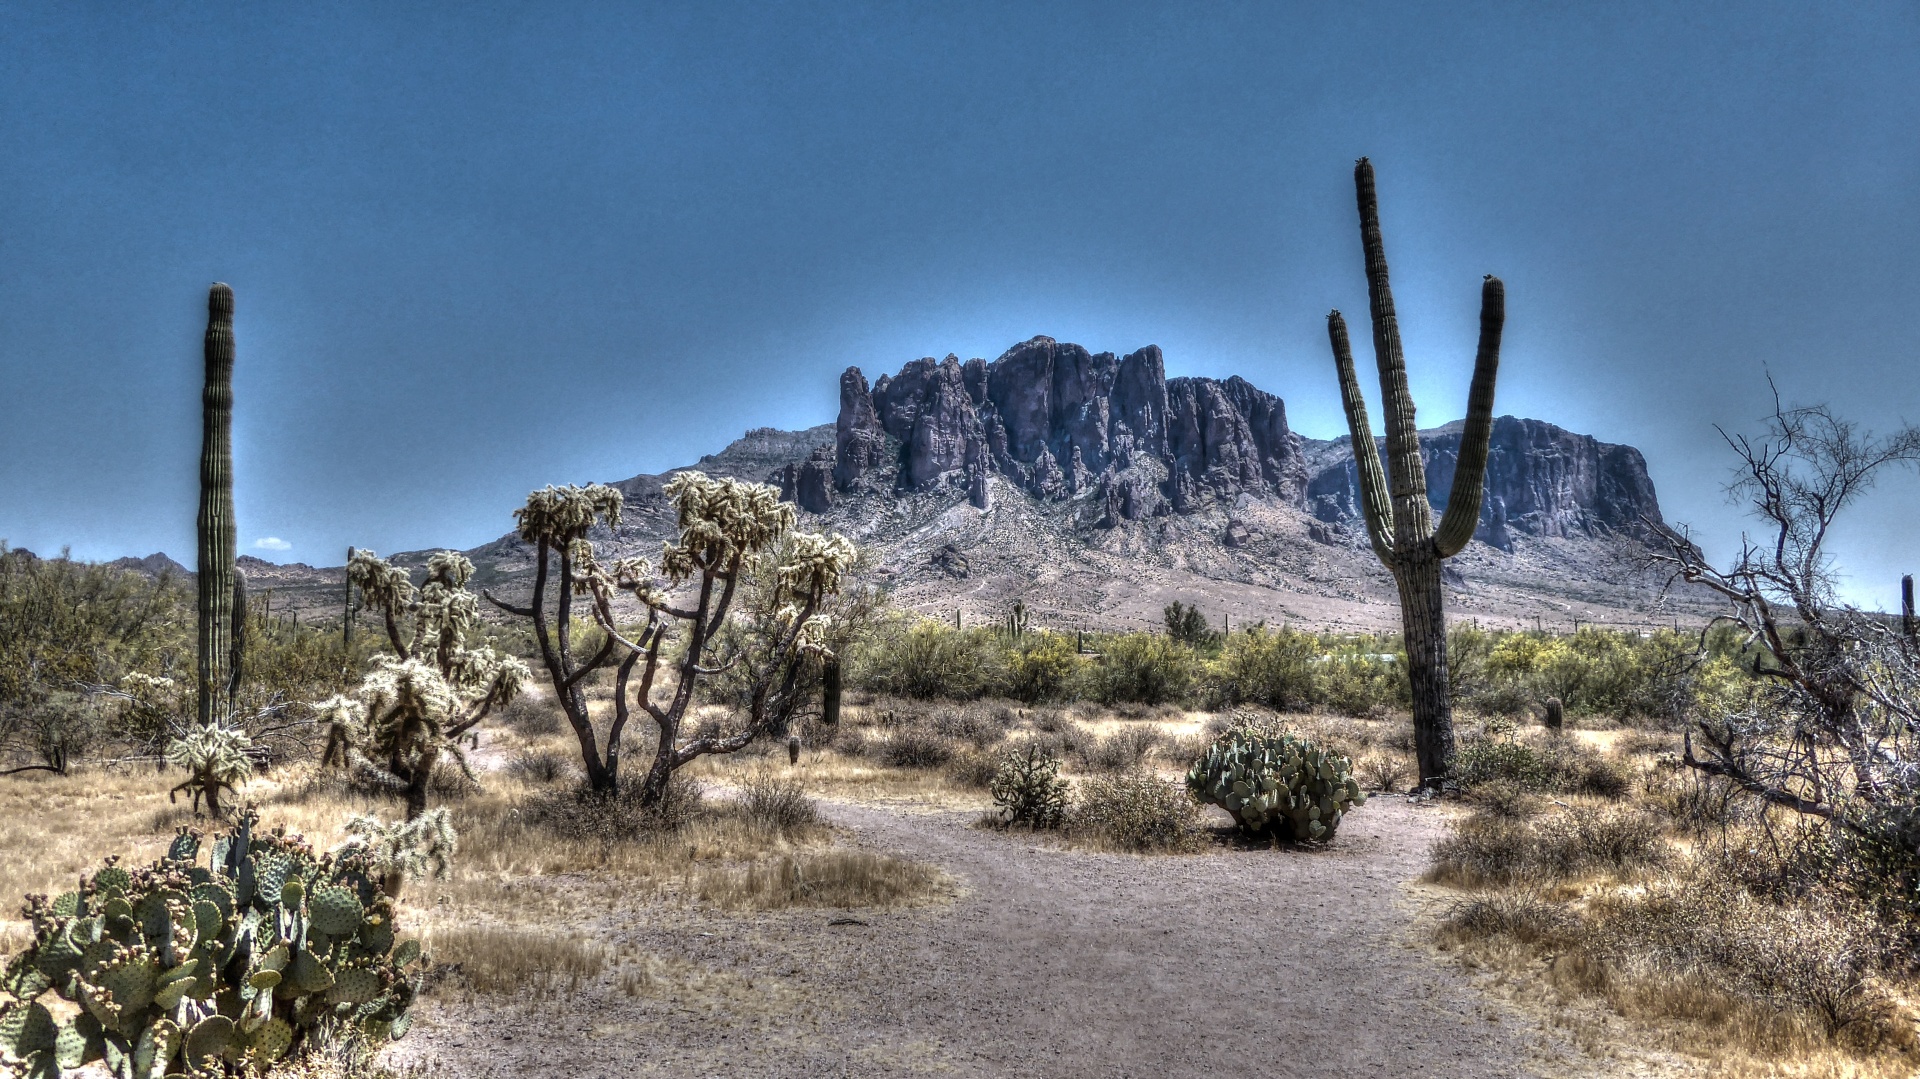 artistic effect applied to photograph of Superstition Mountain in Arizona